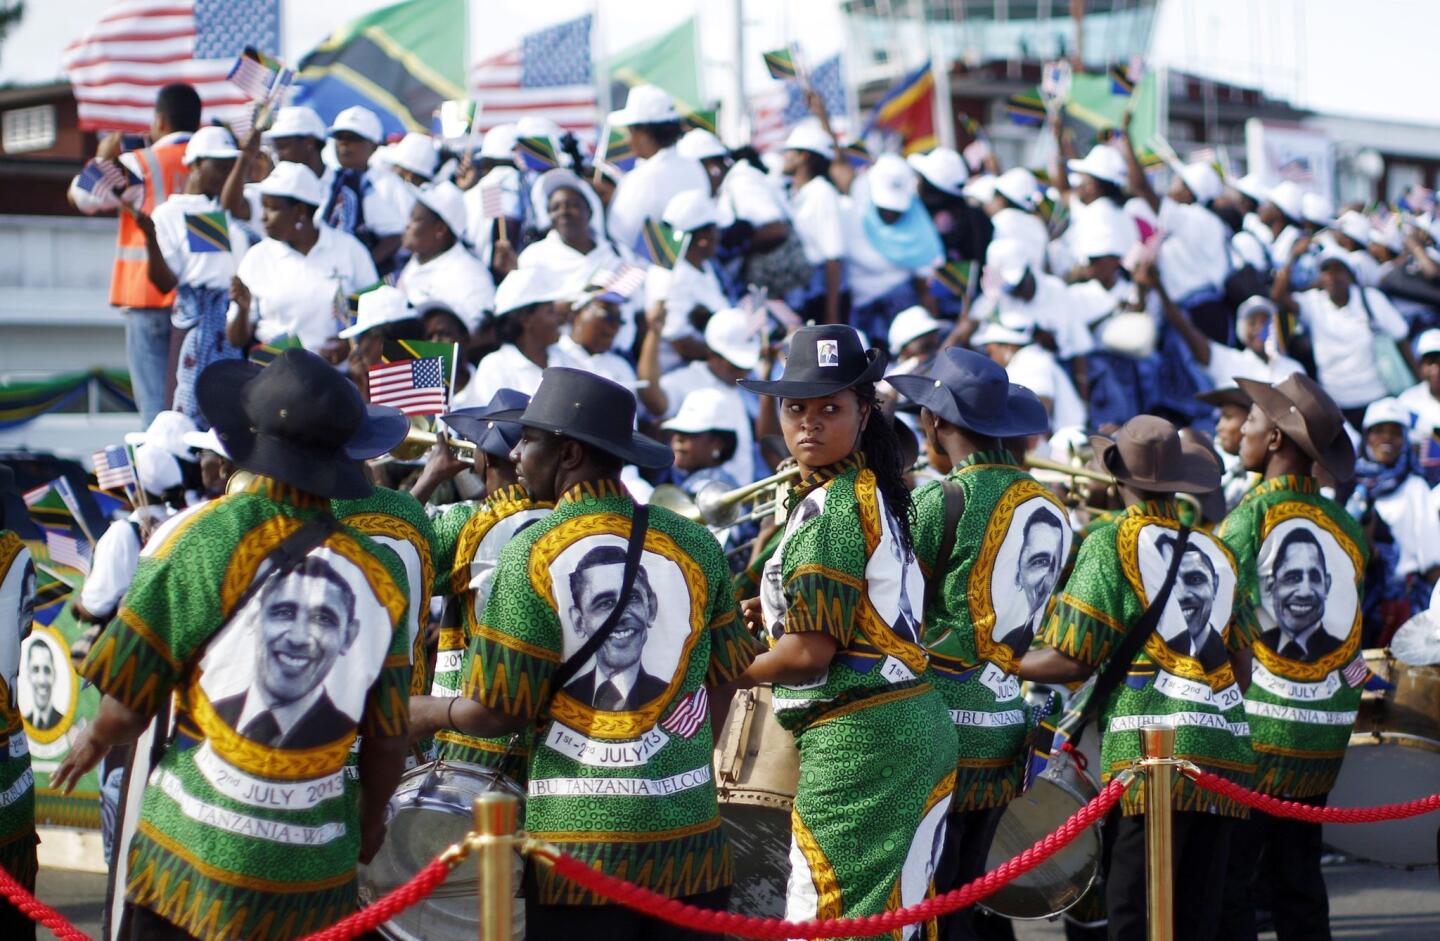 A Tanzanian band wear outfits featuring image of U.S. President Obama during an official arrival ceremony in Dar es Salaam